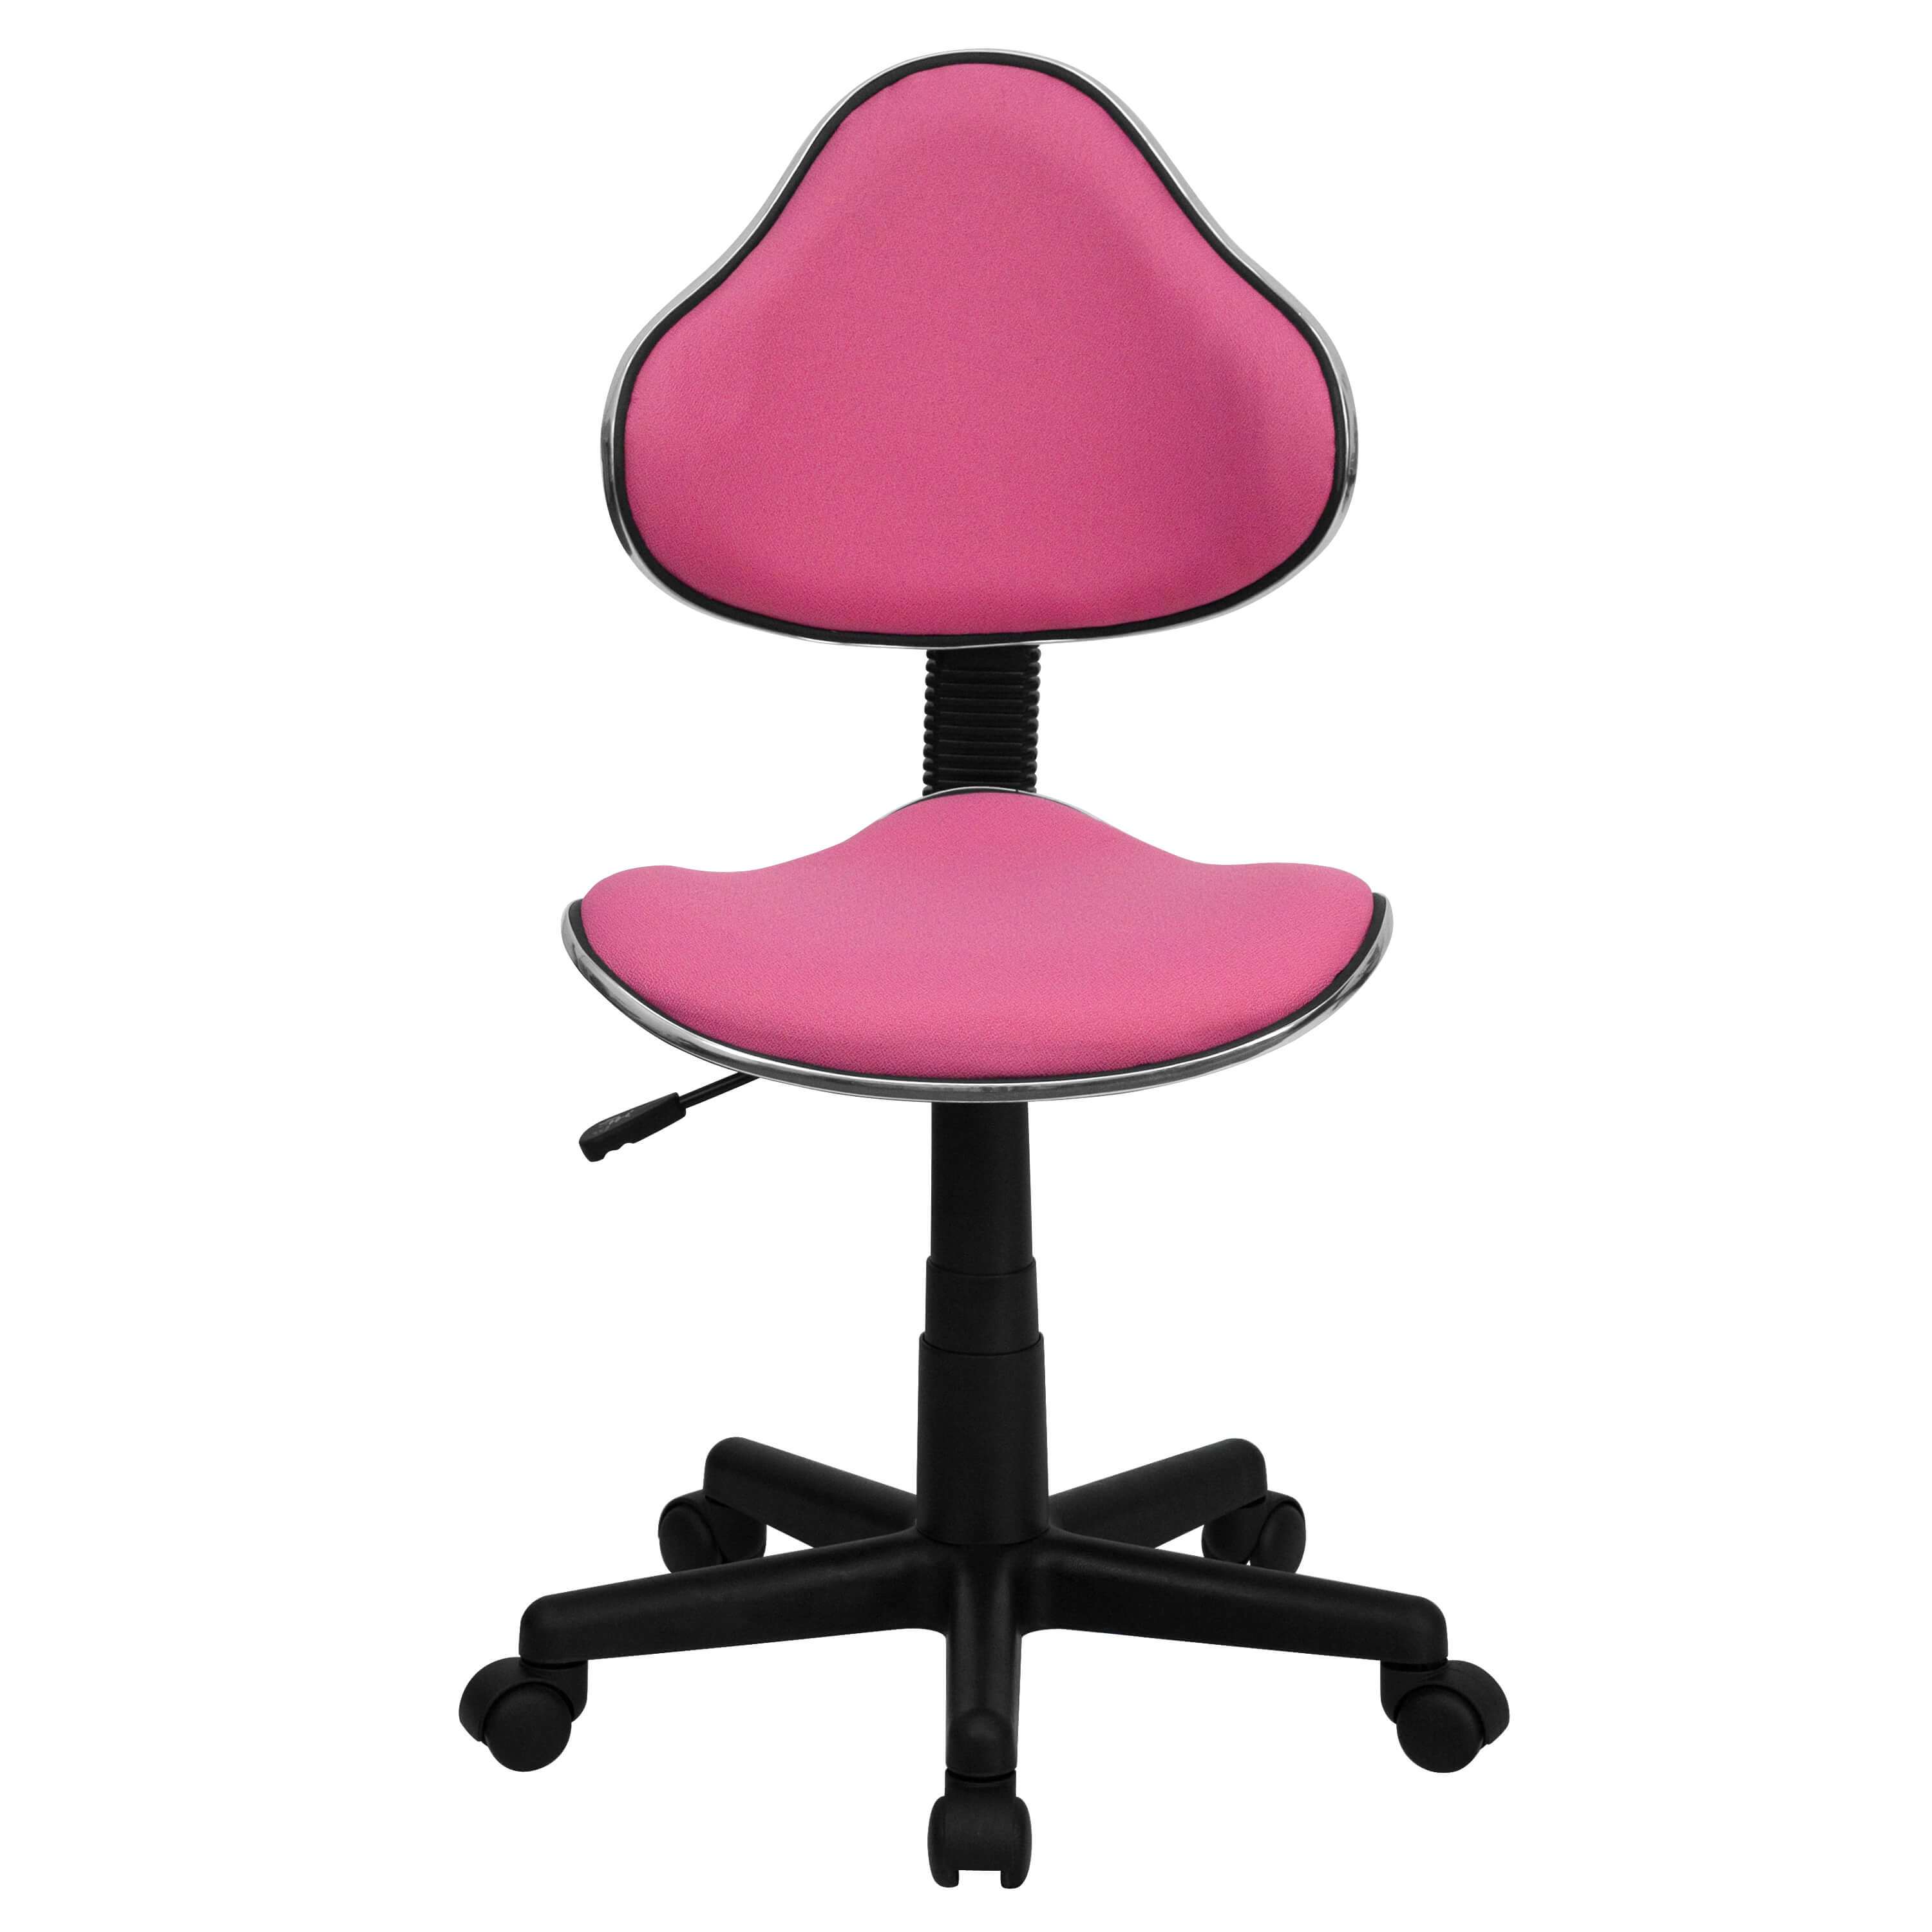 Colorful desk chairs CUB BT 699 PINK GG FLA